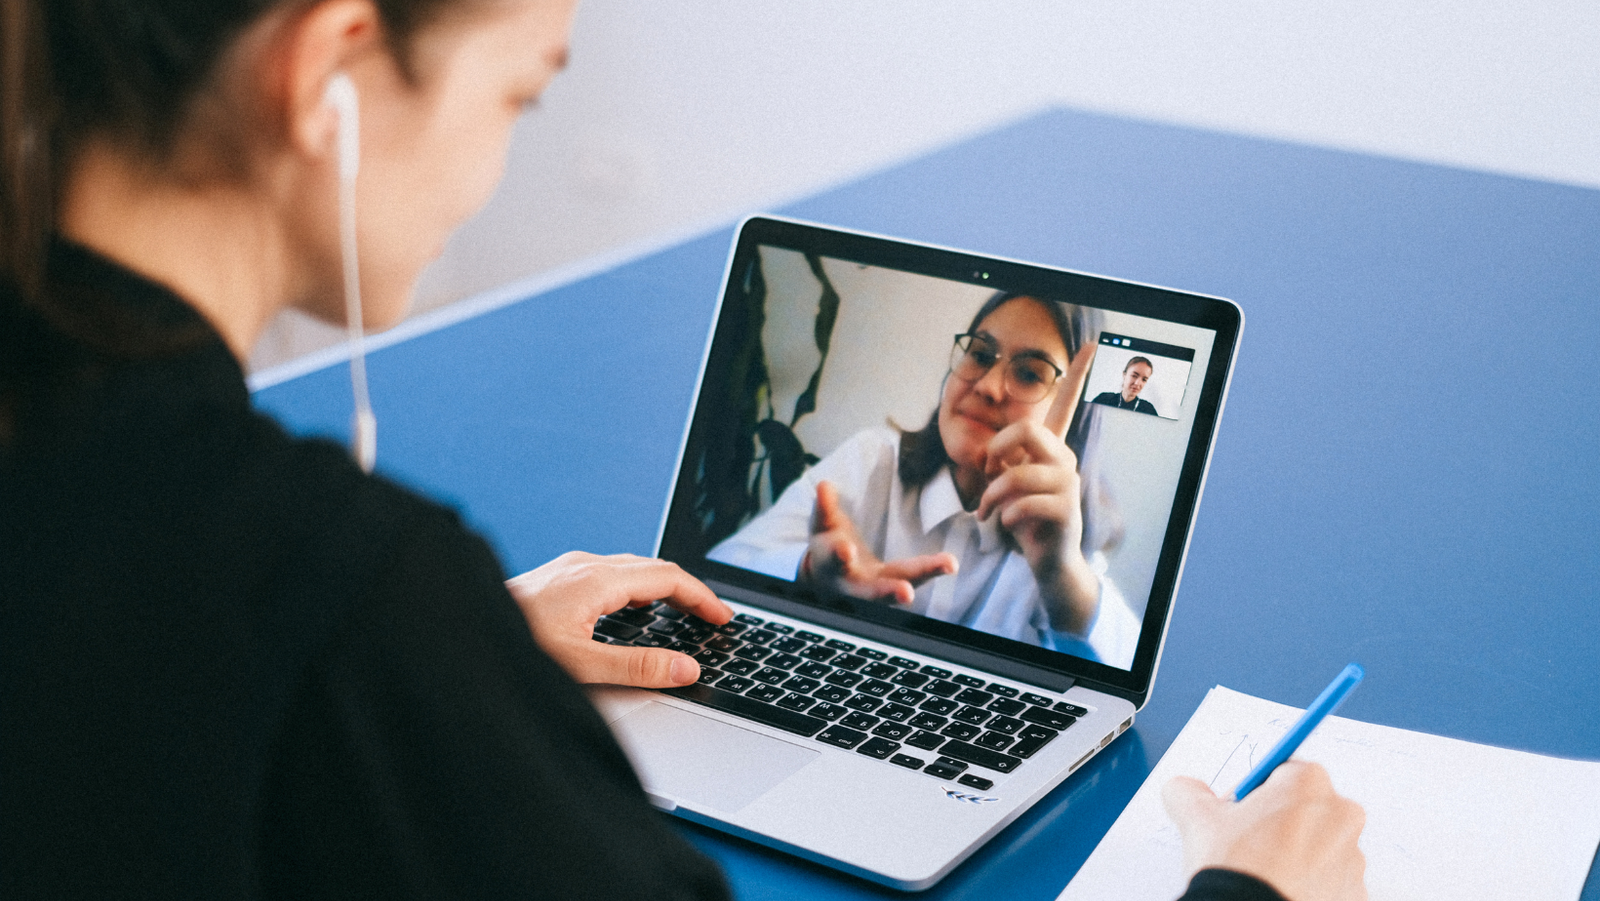 Image of two people on a video call via laptop